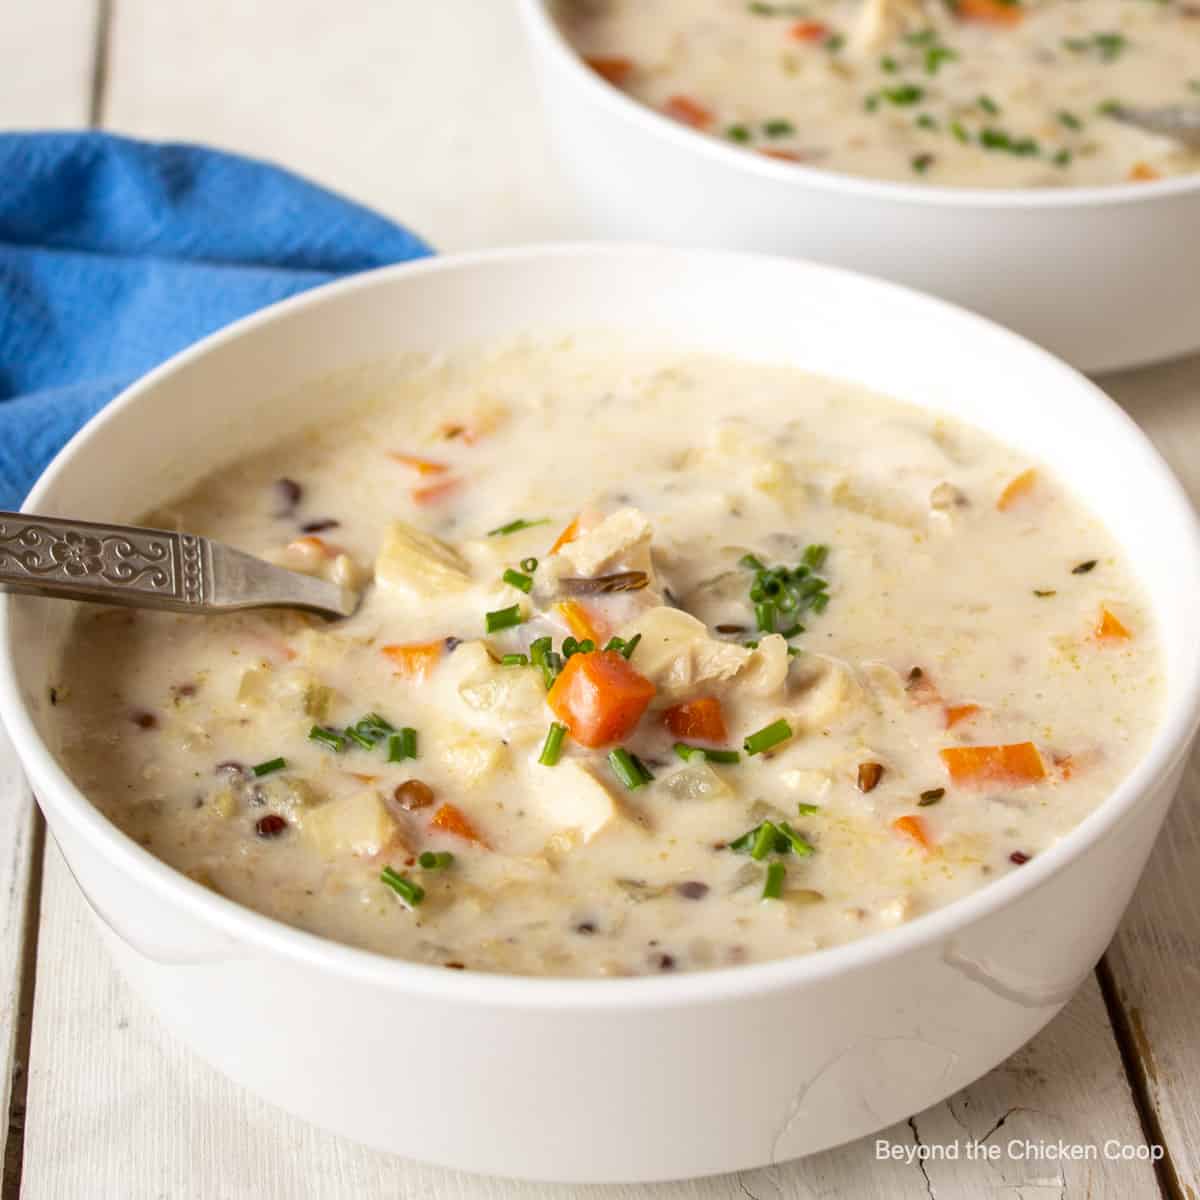 A bowl filled with a creamy white soup.